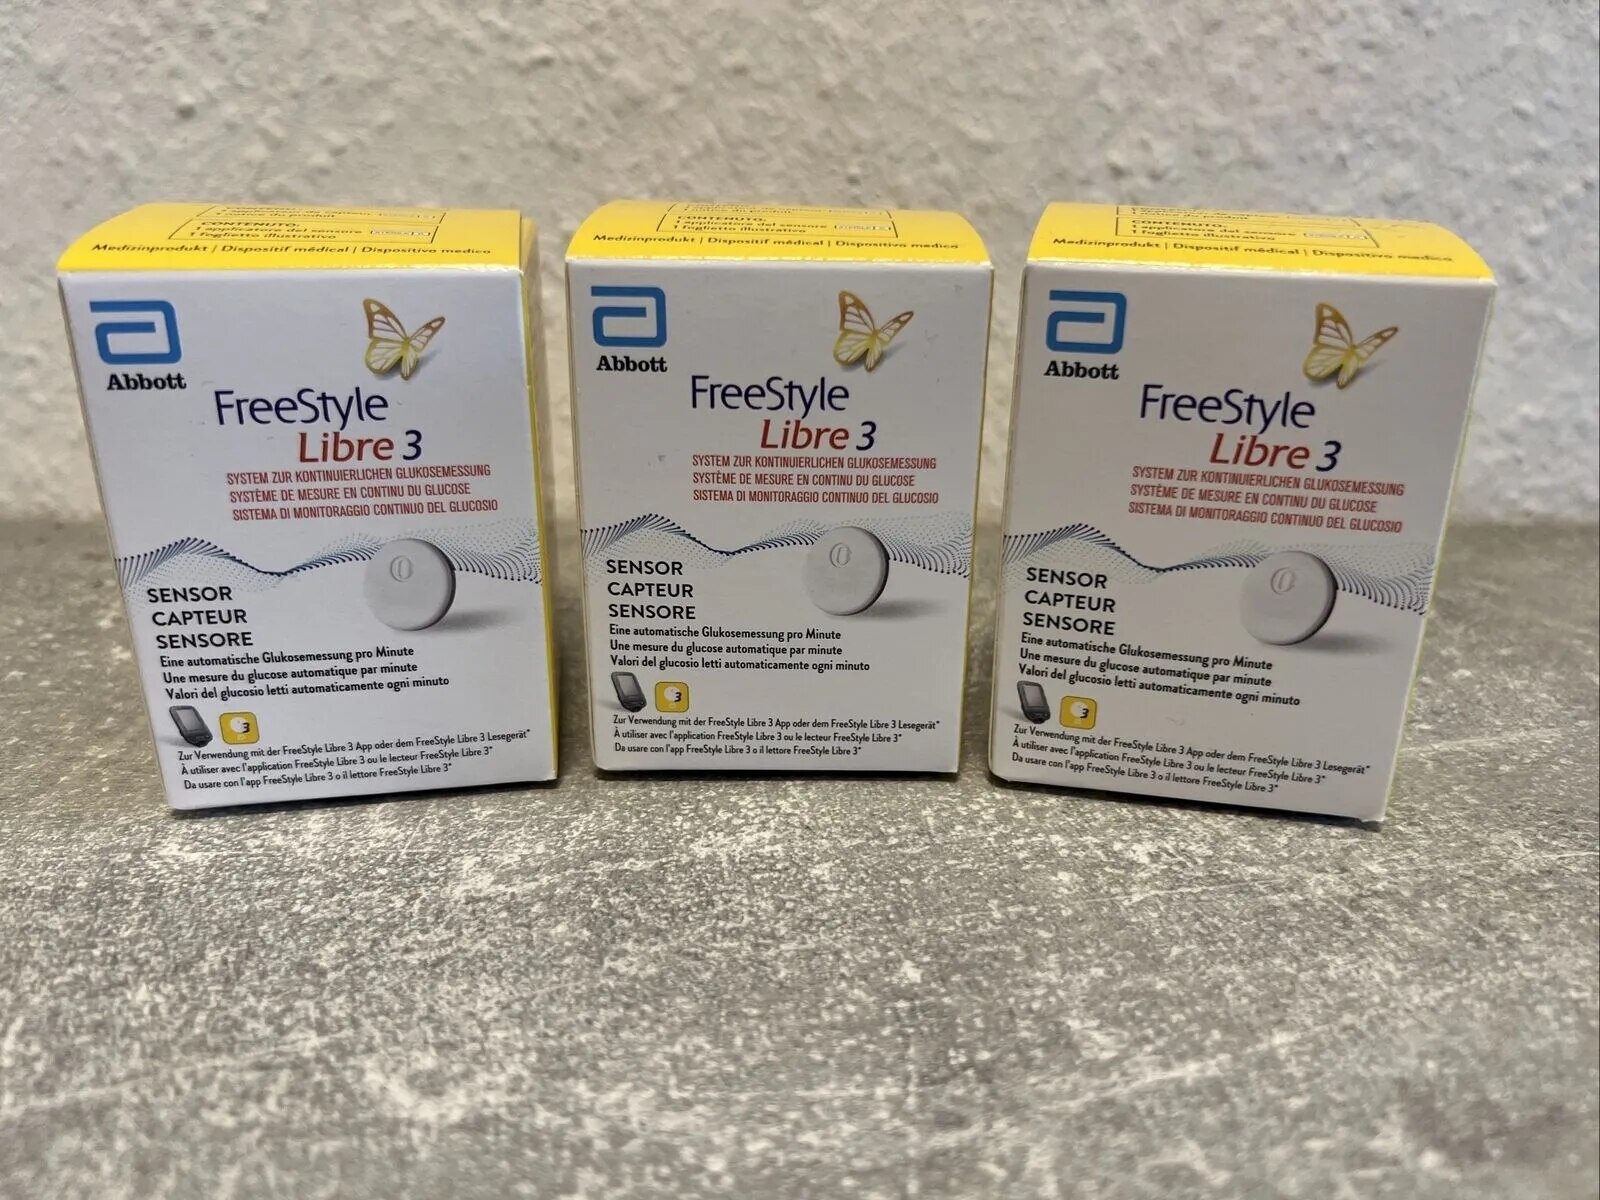 How much does the FreeStyle Libre 2 cost in Canada? Is the Libre 2 covered by insurance?